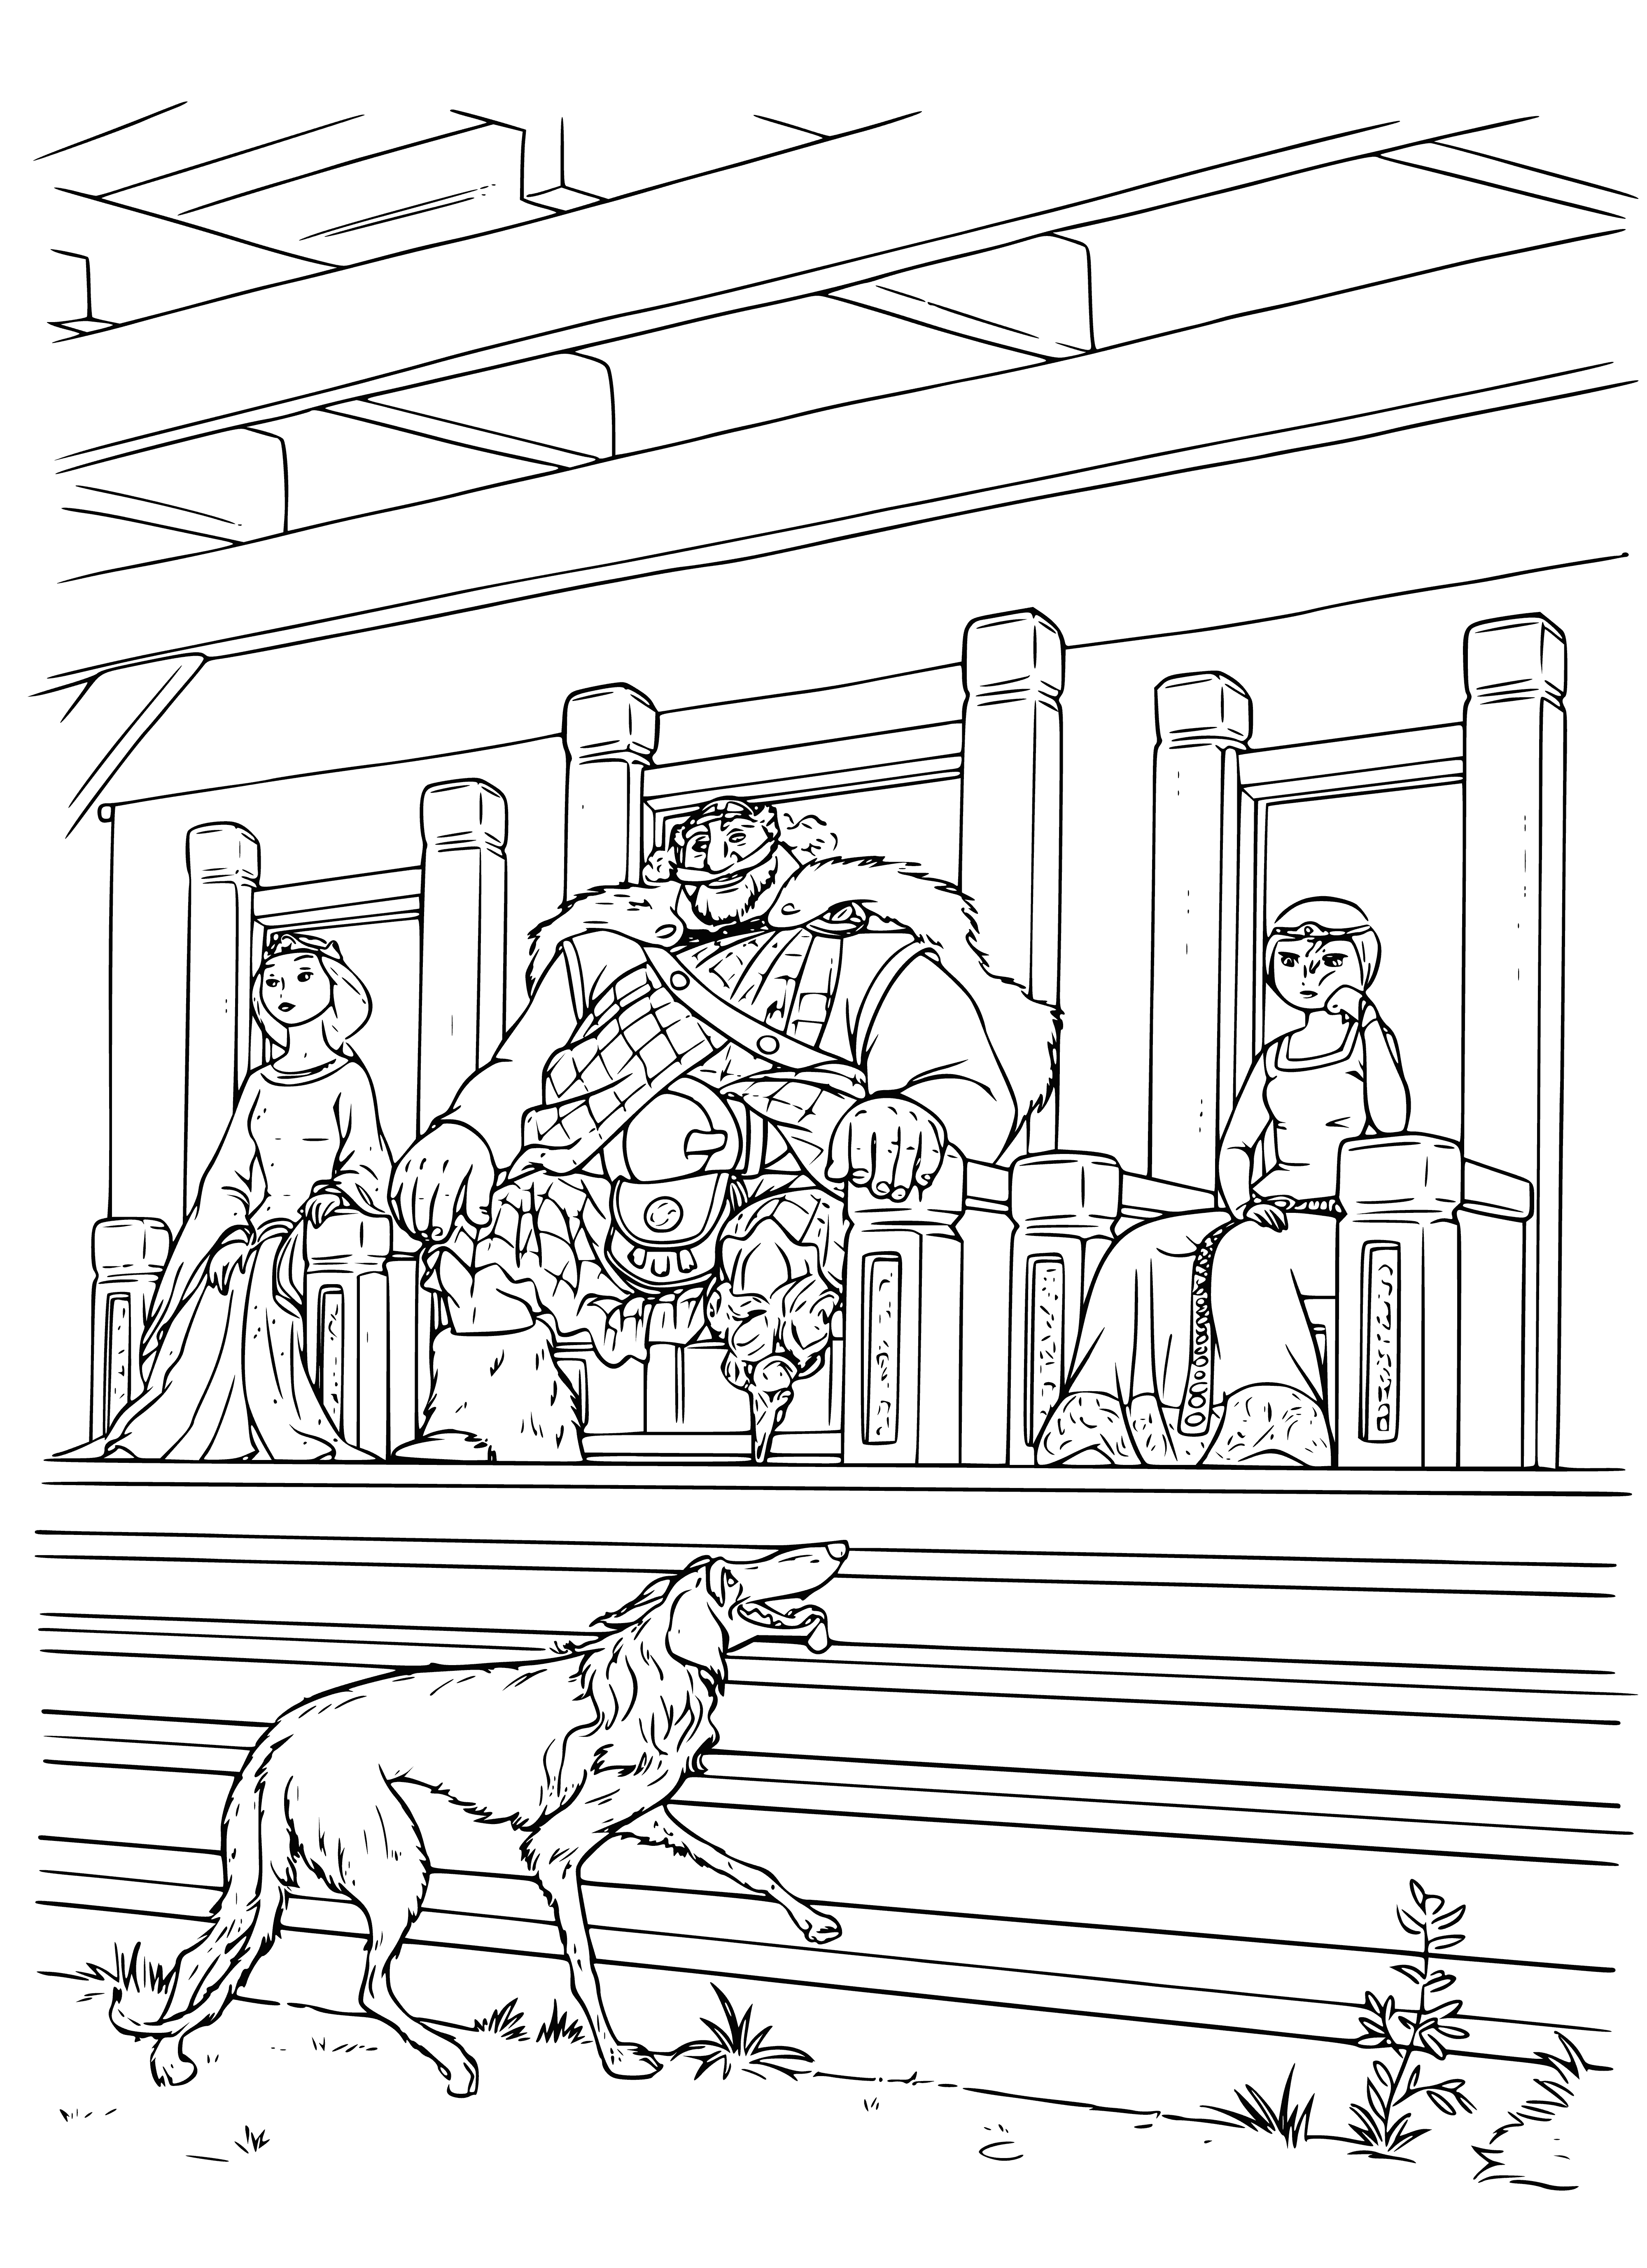 coloring page: Royal family - regal-looking clothing, queen w/sceptre, man w/sword, two men w/ shields. Two children, castle, trees/mountains in background.